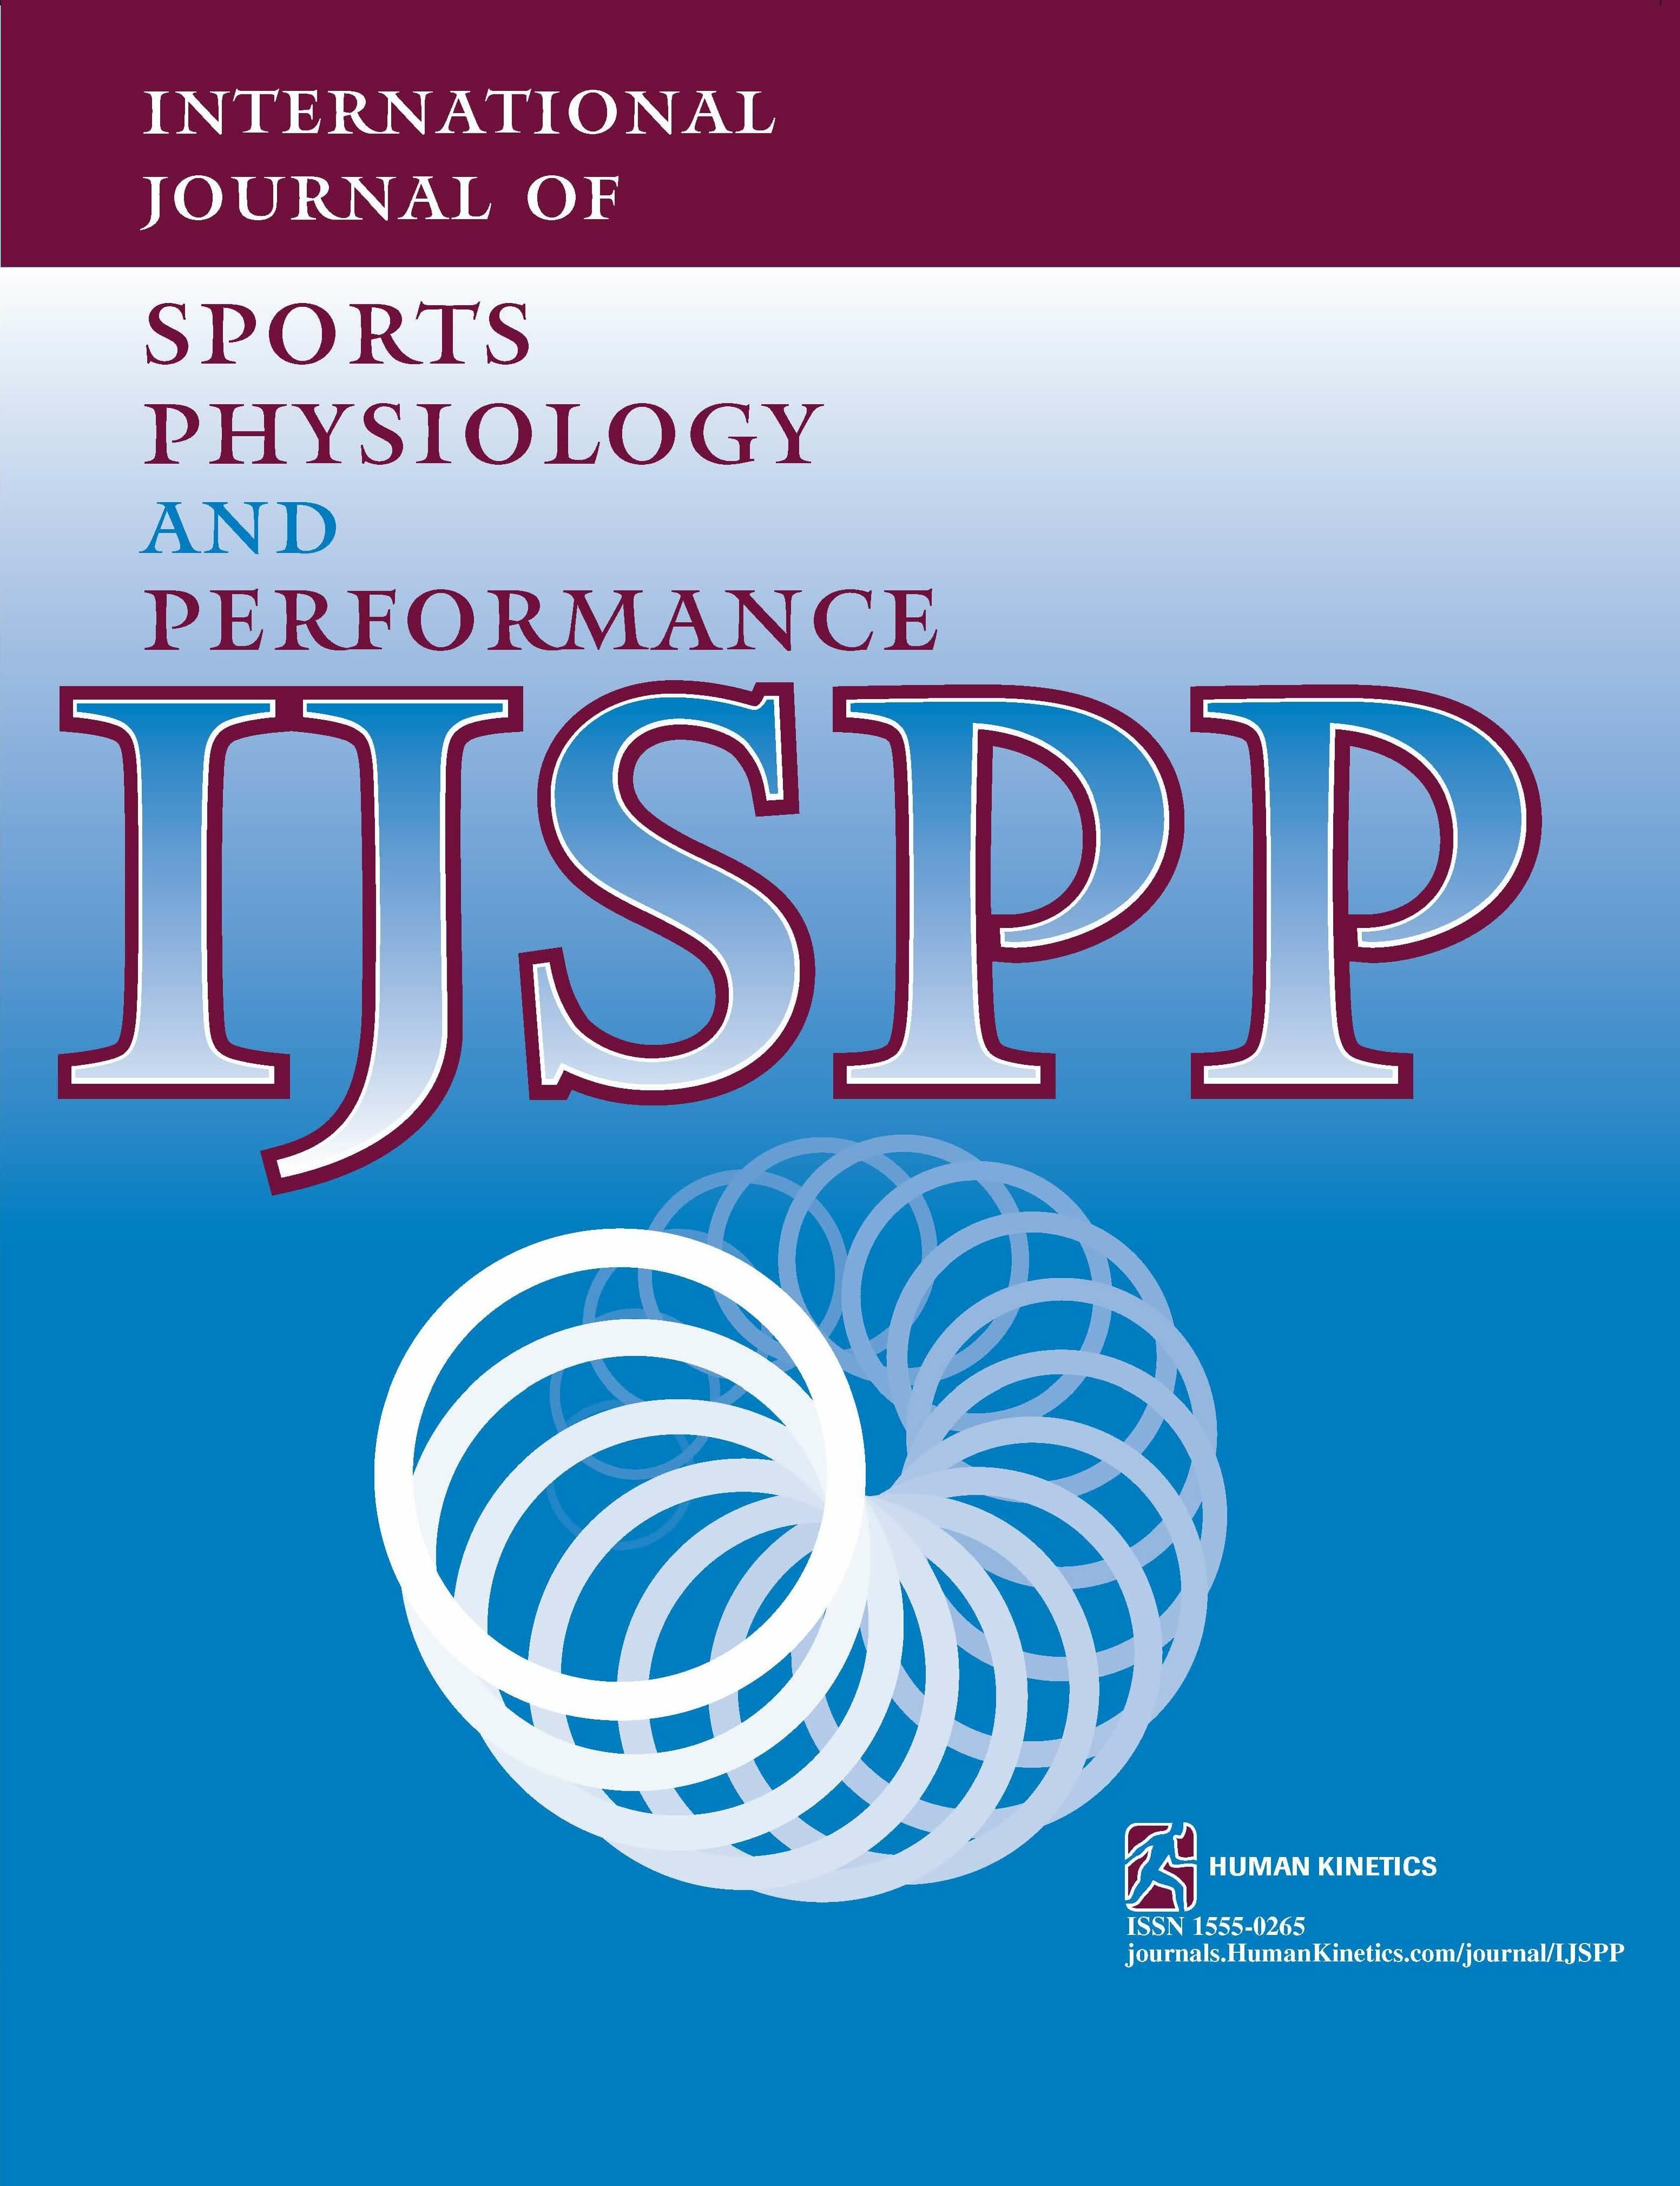 Effect of Wetsuit Use on Body Temperature and Swimming Performance During Training in the Pool: Recommendations for Open-Water Swimming Training With Wetsuits